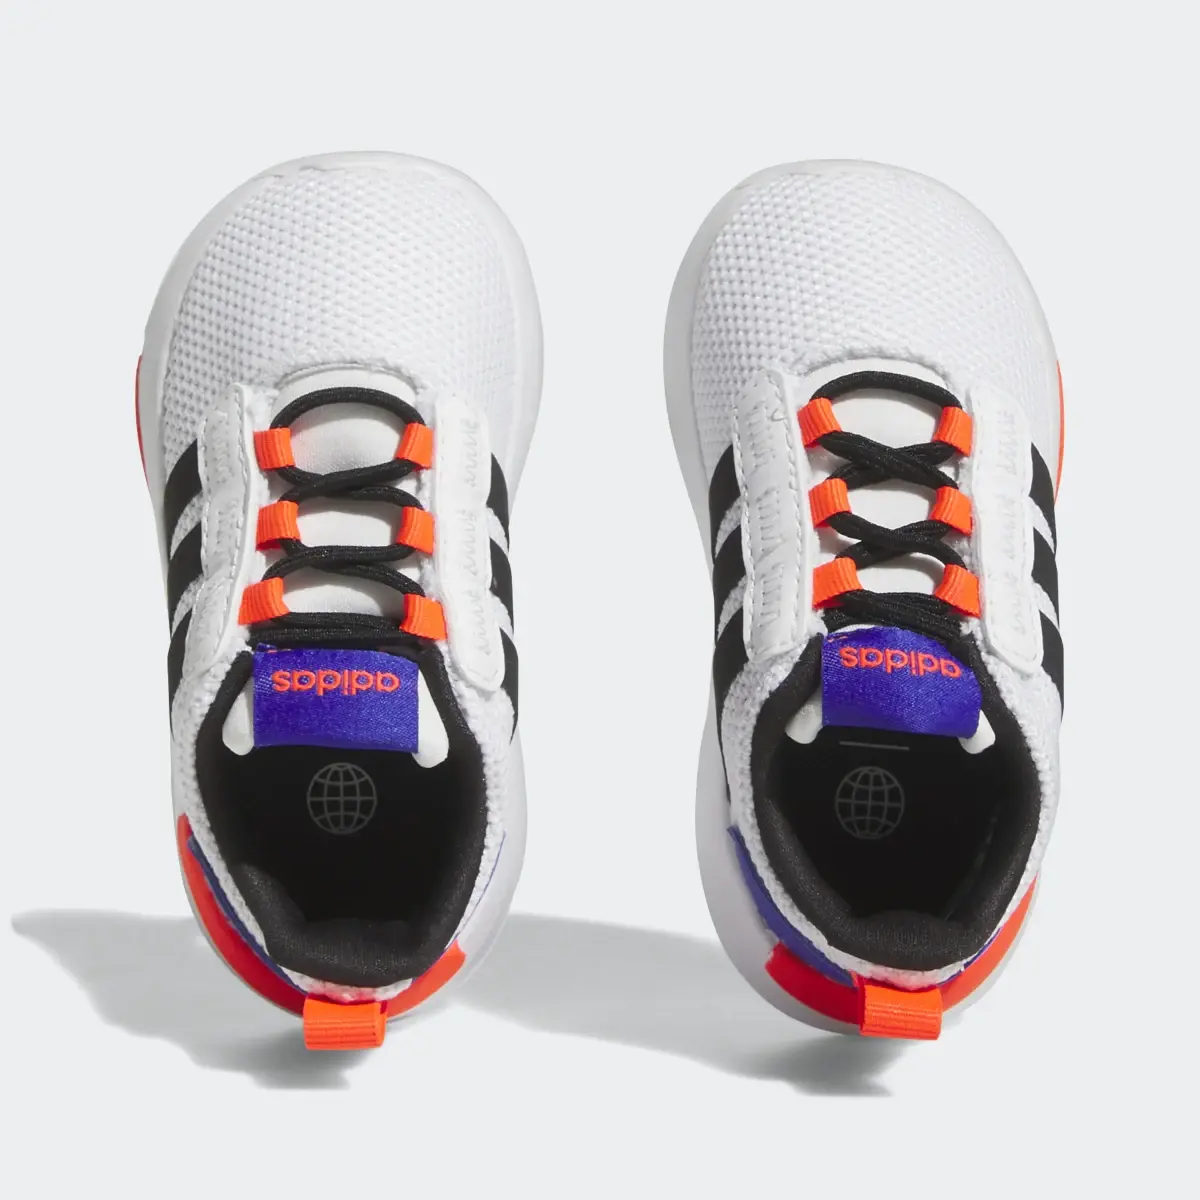 Adidas Chaussure Racer TR21. 3